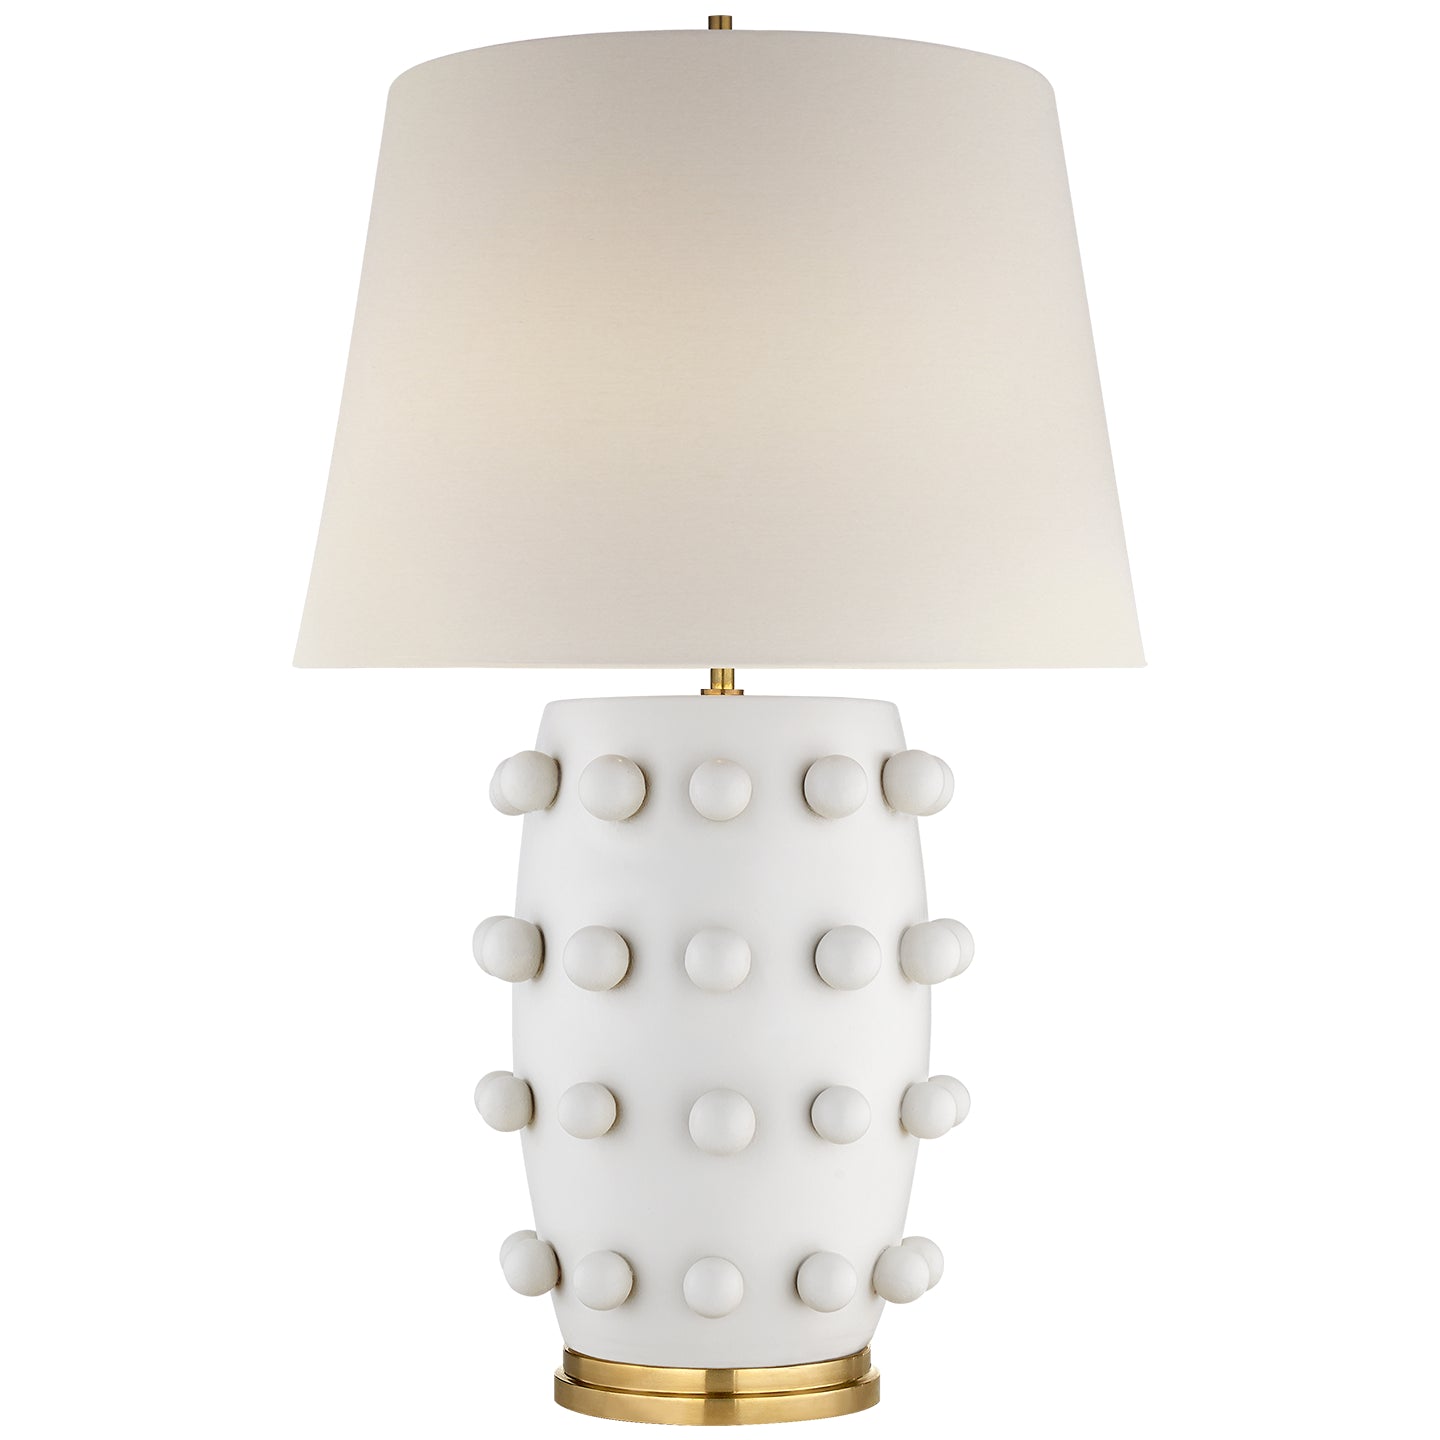 Visual Comfort Signature - KW 3031PW-L - One Light Table Lamp - Linden - Plaster White